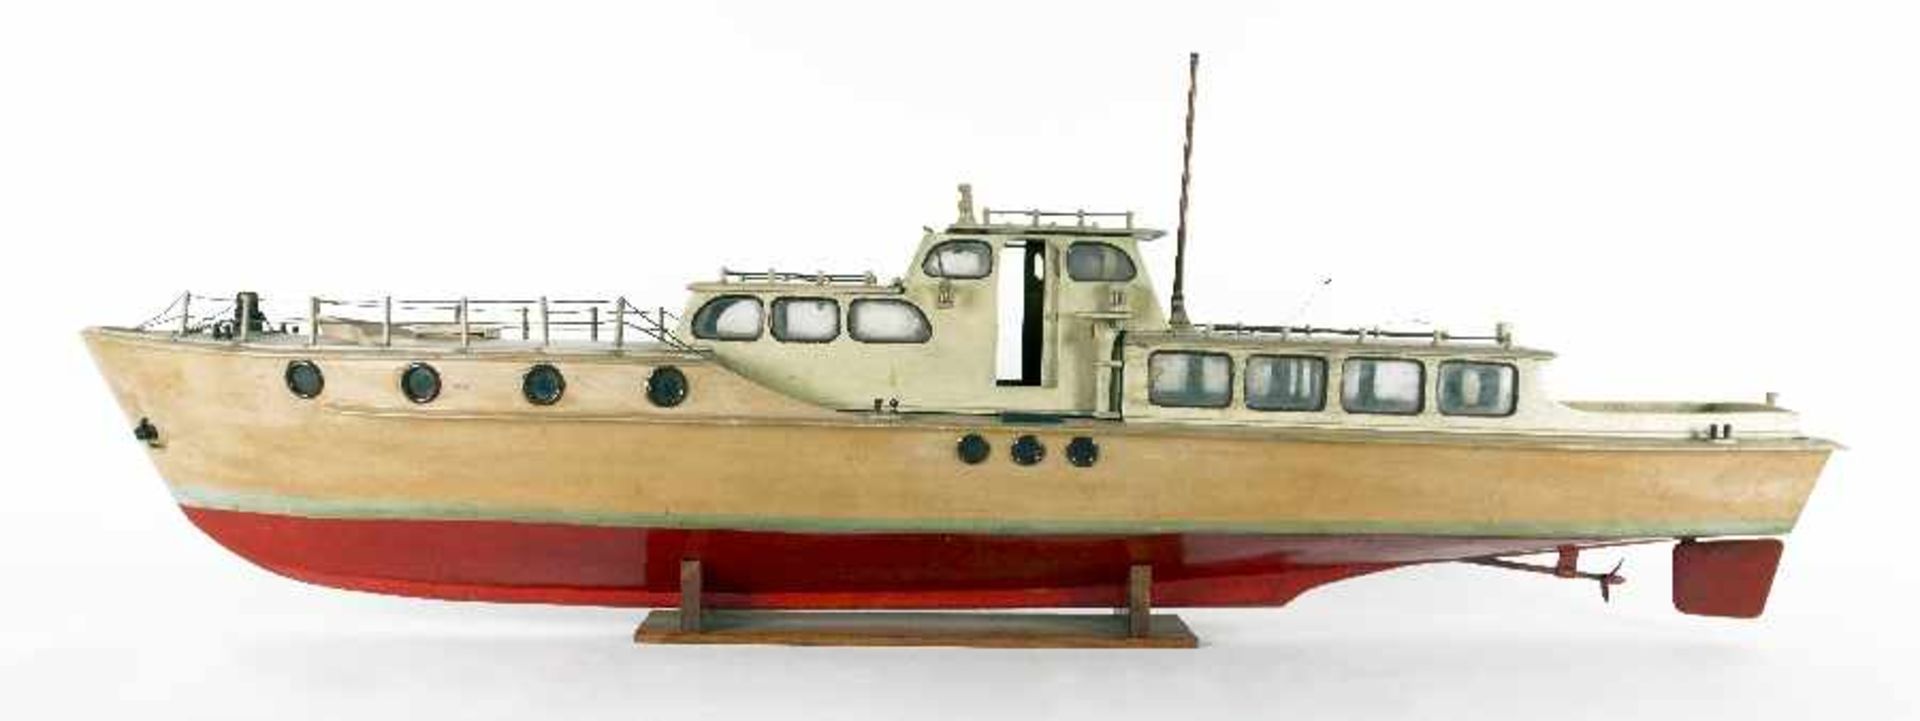 Germany, mid-20th centuryModel of a motor yachtWood, lacquered, metal, plastic; formerly